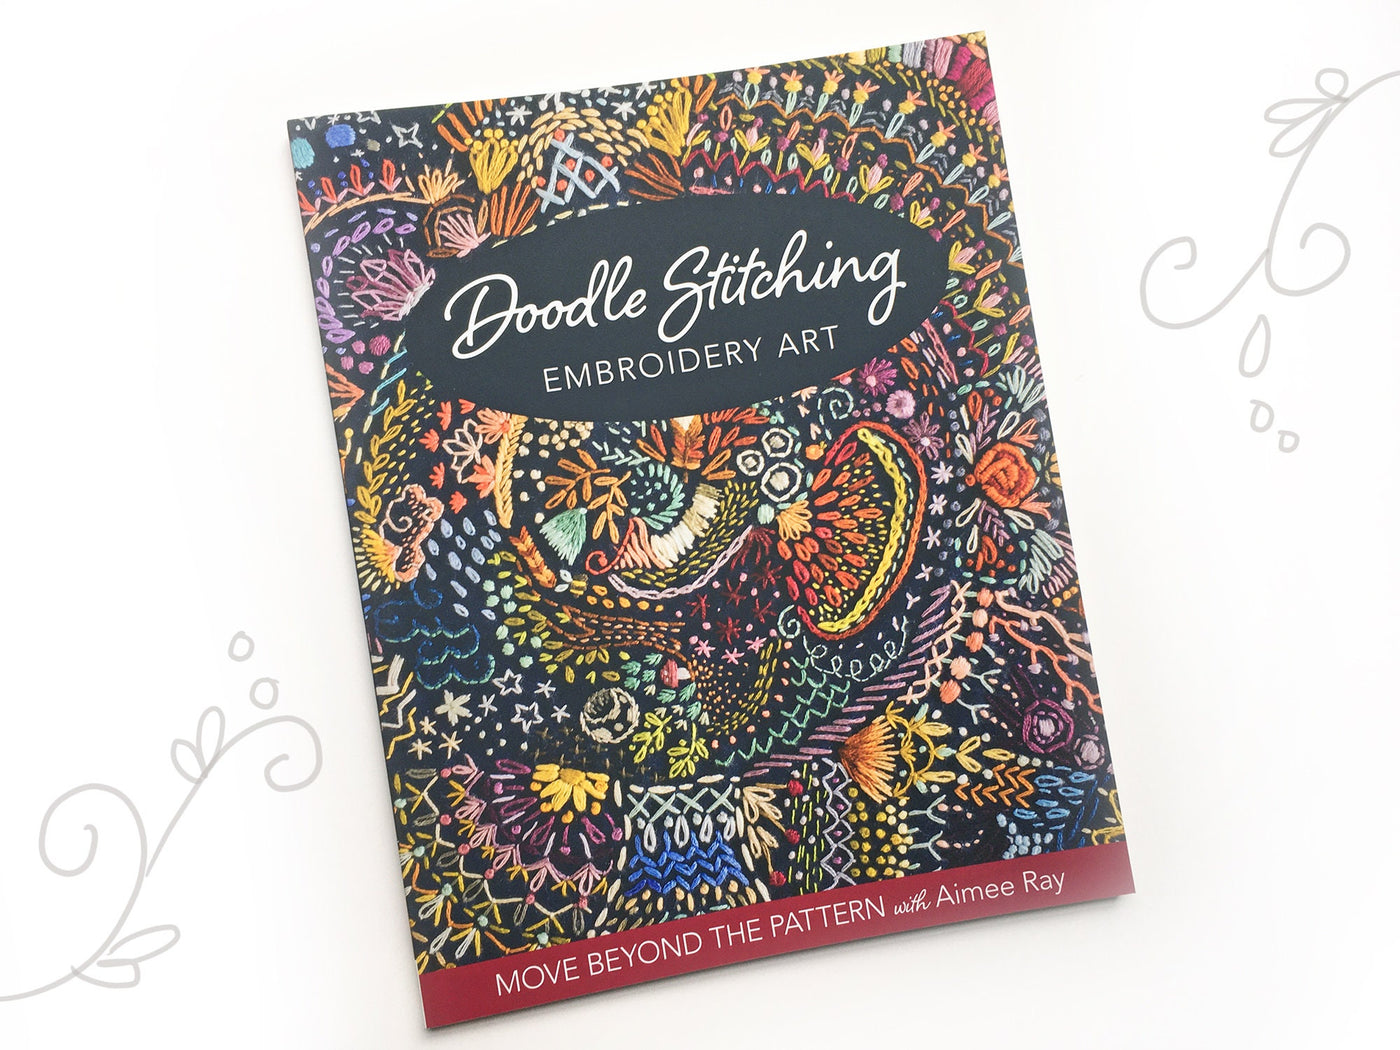 Doodle Stitching Embroidery Art Hand Embroidery Book by Aimee Ray